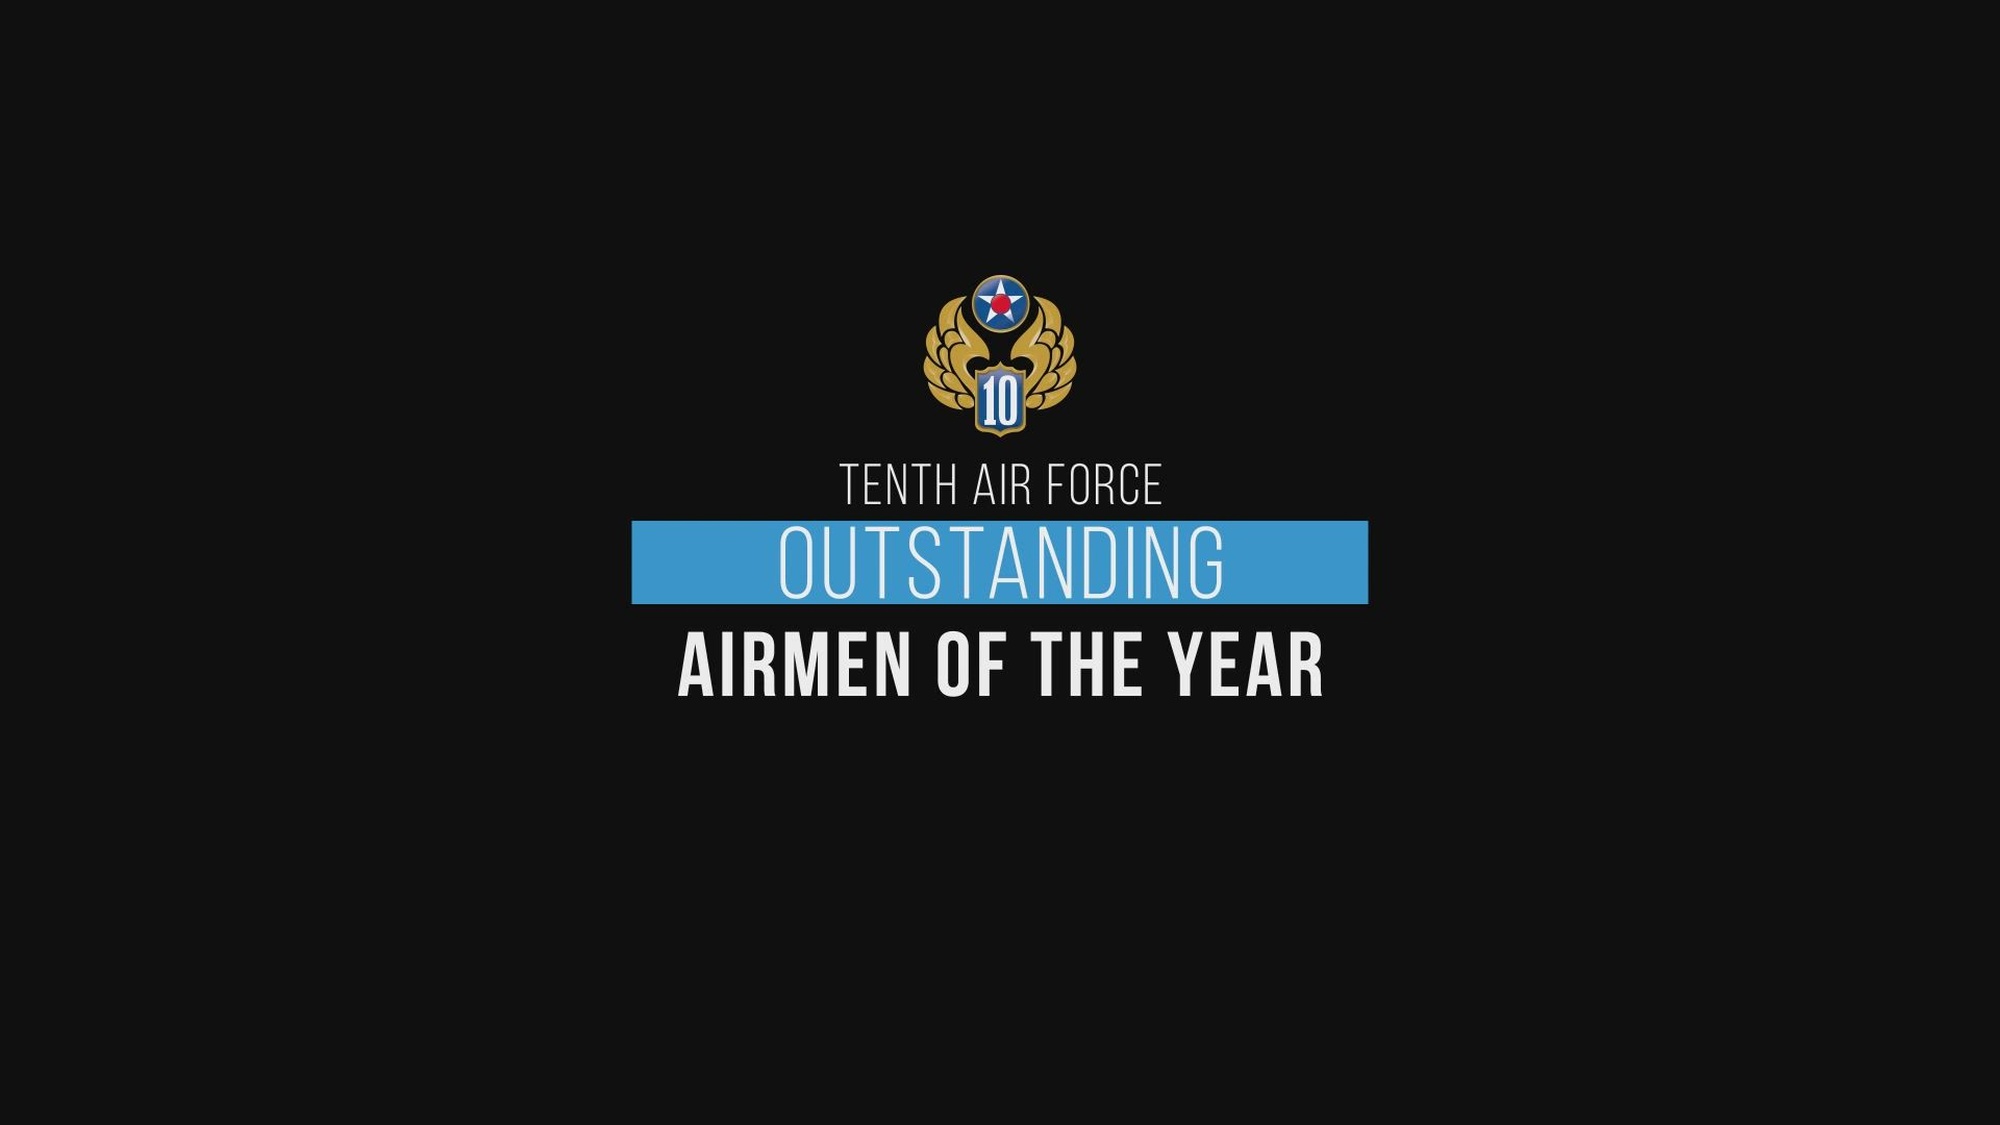 The Tenth Air Force Outstanding Airmen of the Year are:
Airman of the Year - SrA Myah M. Periman, 919th Special Operations Wing 
Non-Commisioned Officer (NCO) of the Year  – TSgt Brianne E. Kelleher 655th ISR Wing 
Senior NCO of the Year - MSgt Corry J. Yokley 944th Fighter Winig 
1st Sgt of the Year – SMSgt Sarah M.  Plueger 513th Air Control Group 
First Sergeants Council of the Year – 926th Wing
Good luck at the Air Force Reserve Command level!